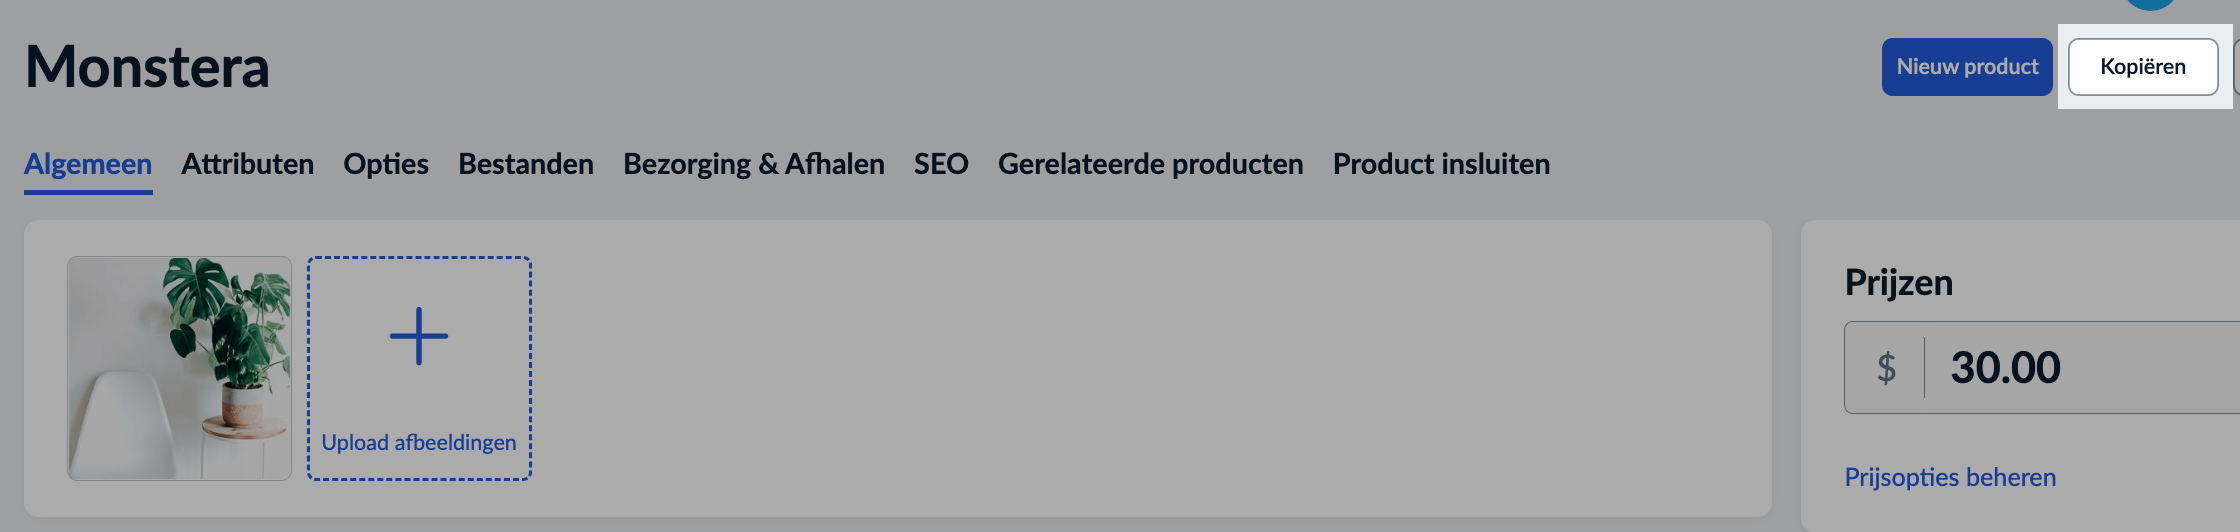 duplicate_product_nl.png